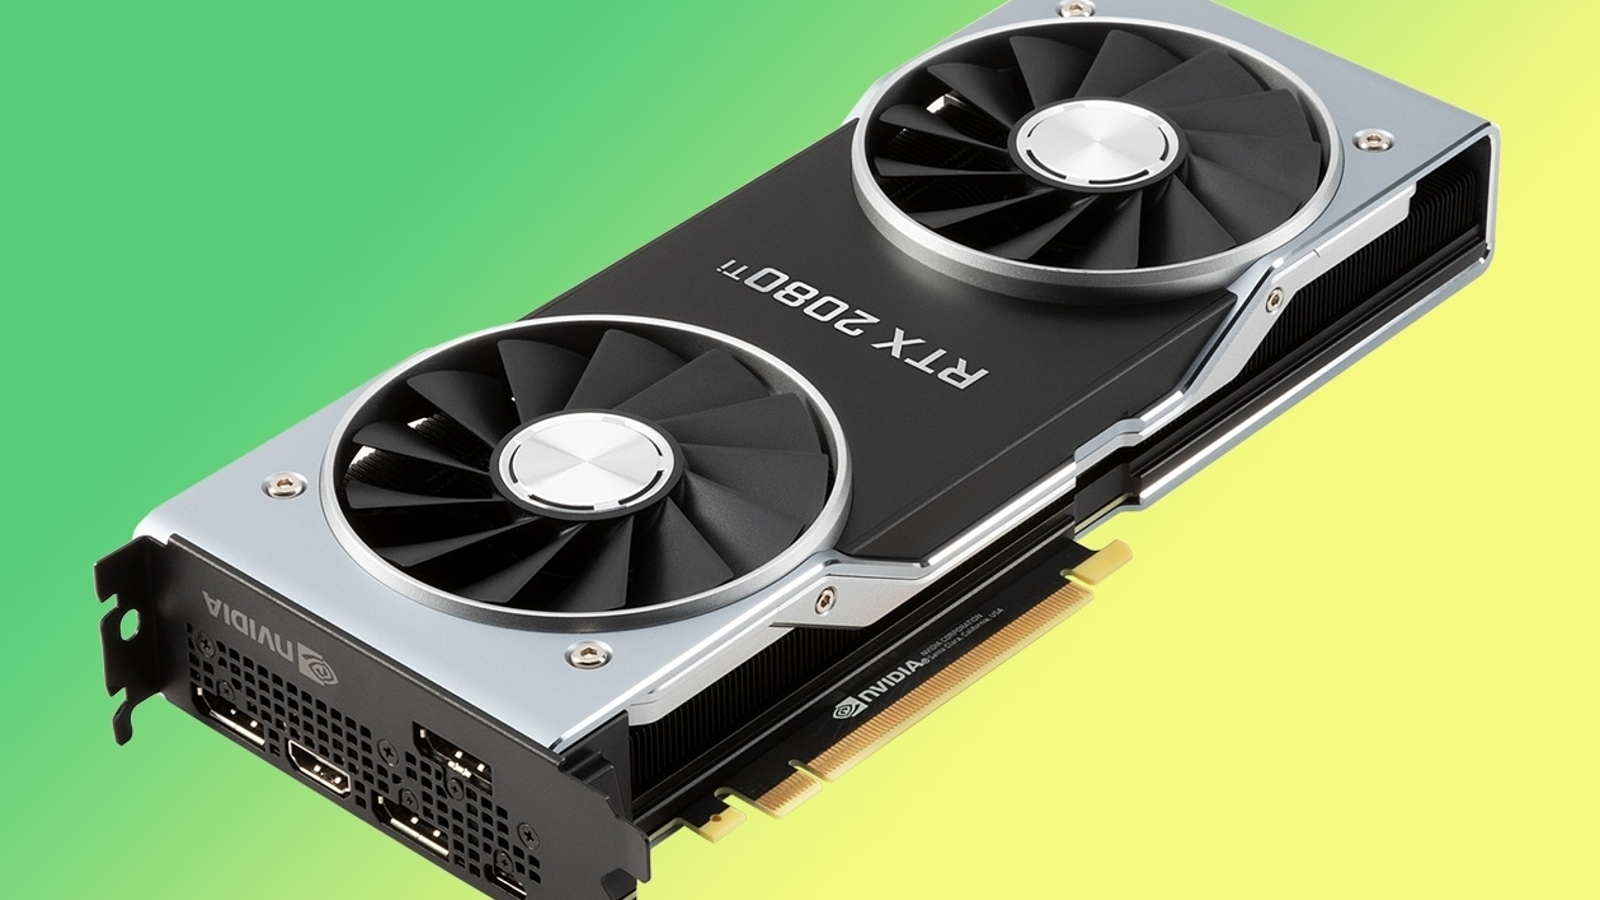 NVIDIA GeForce GTX 1650 is now the most popular GPU according to